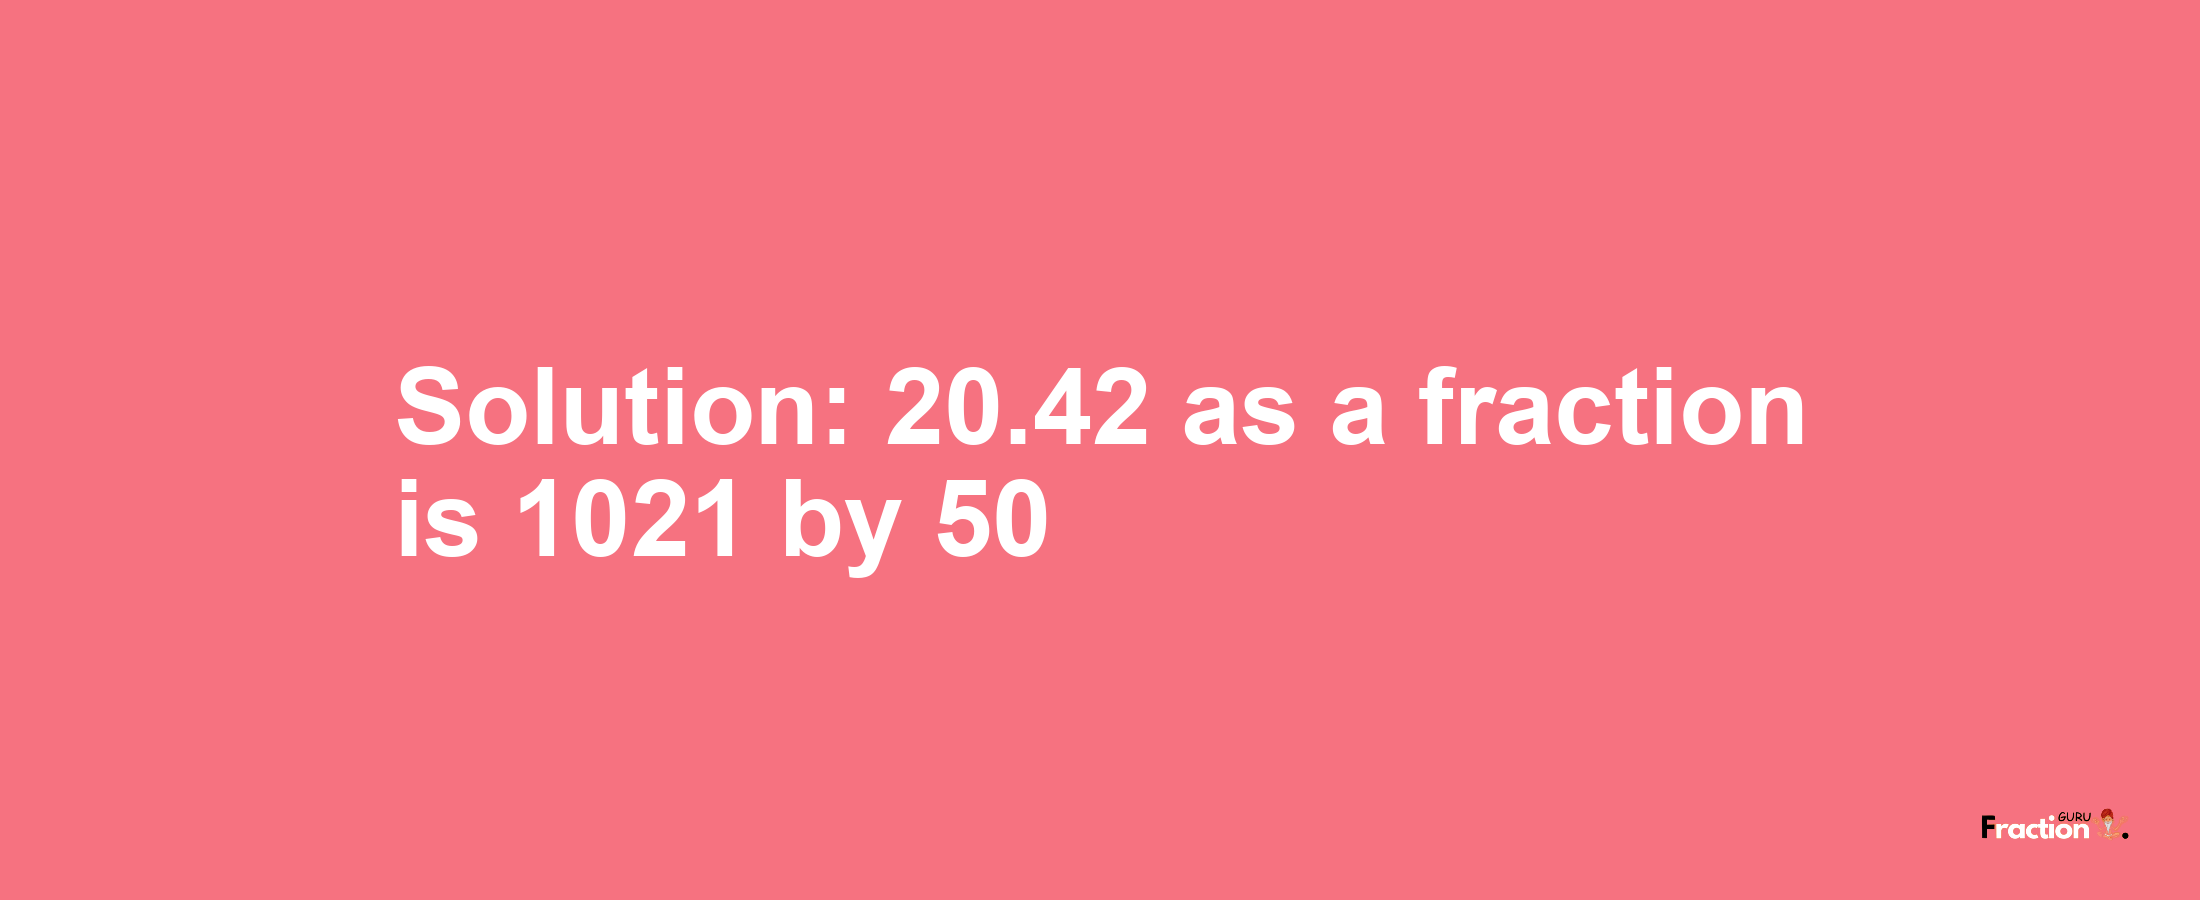 Solution:20.42 as a fraction is 1021/50